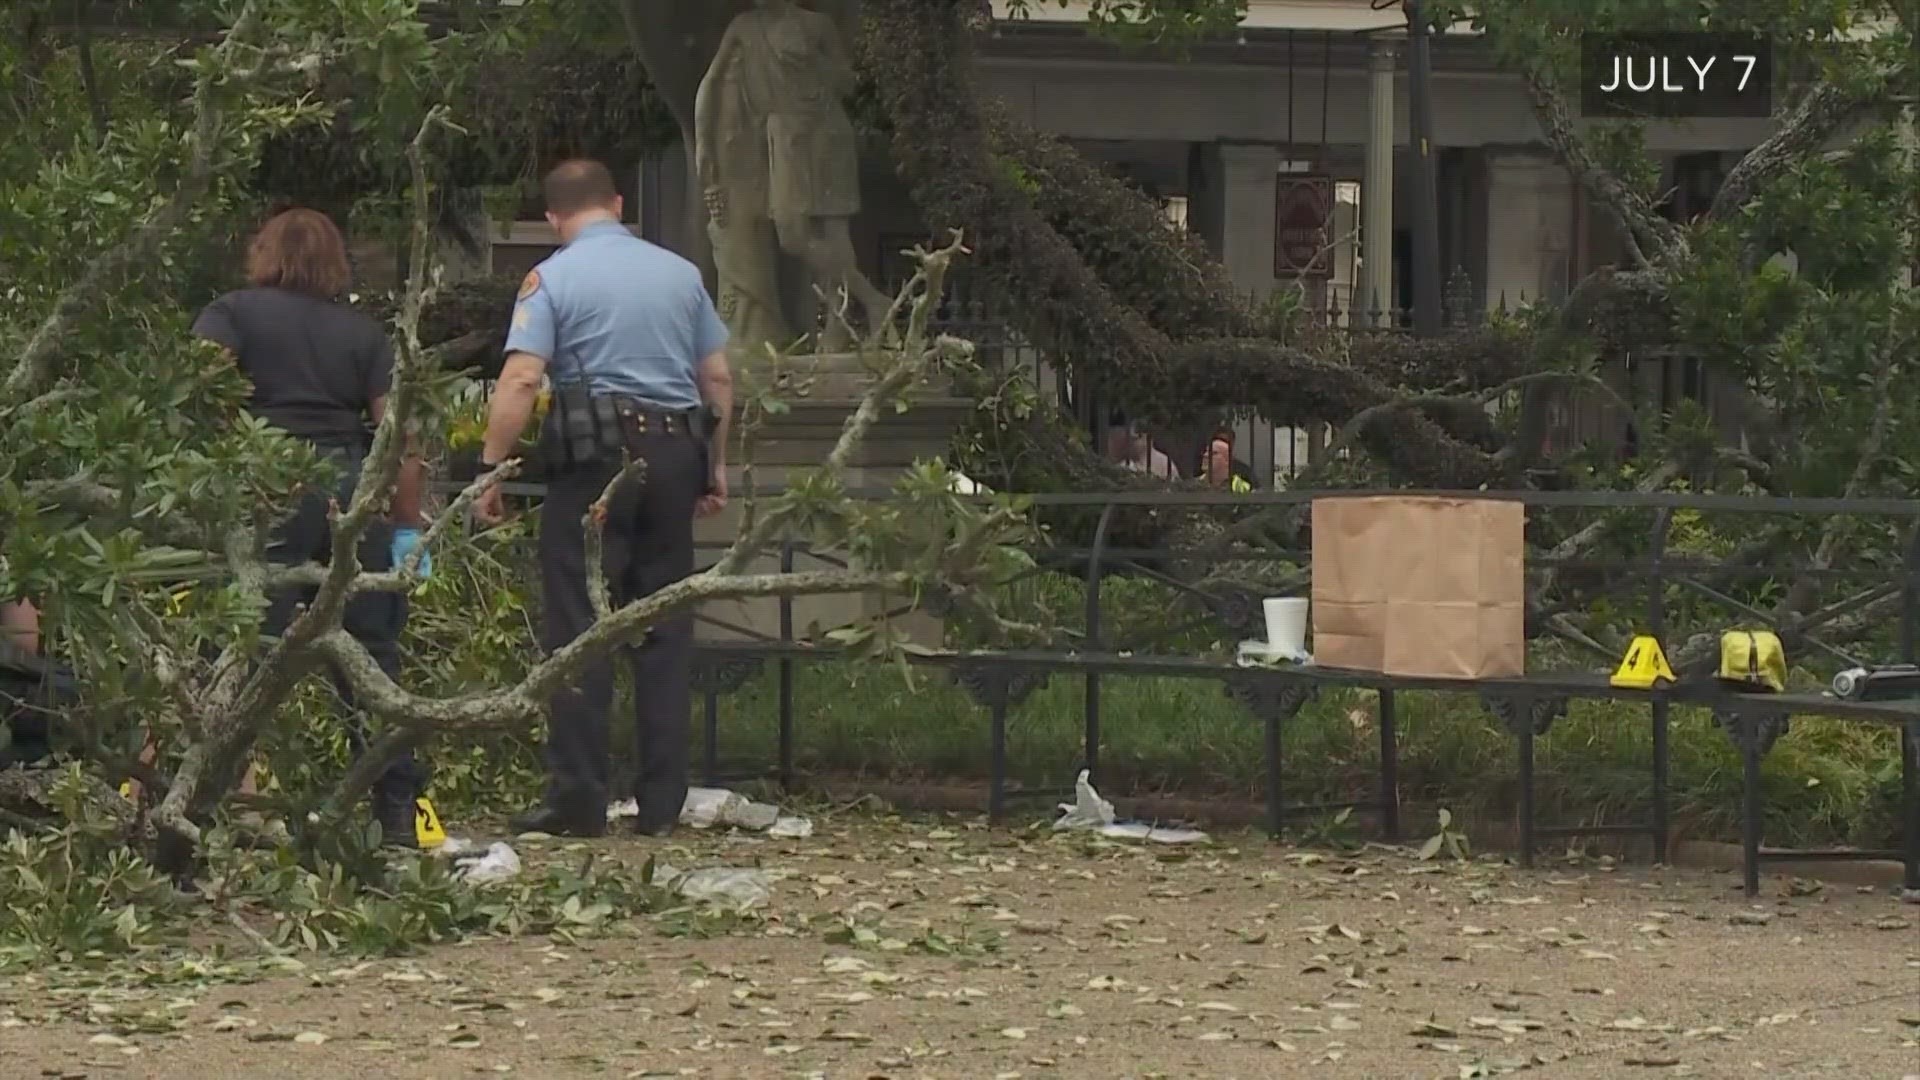 17-year-old Gavin Cristea was sitting on a bench with his mother and sibling in Jackson Square when the tree suddenly dropped and caused catastrophic damage.